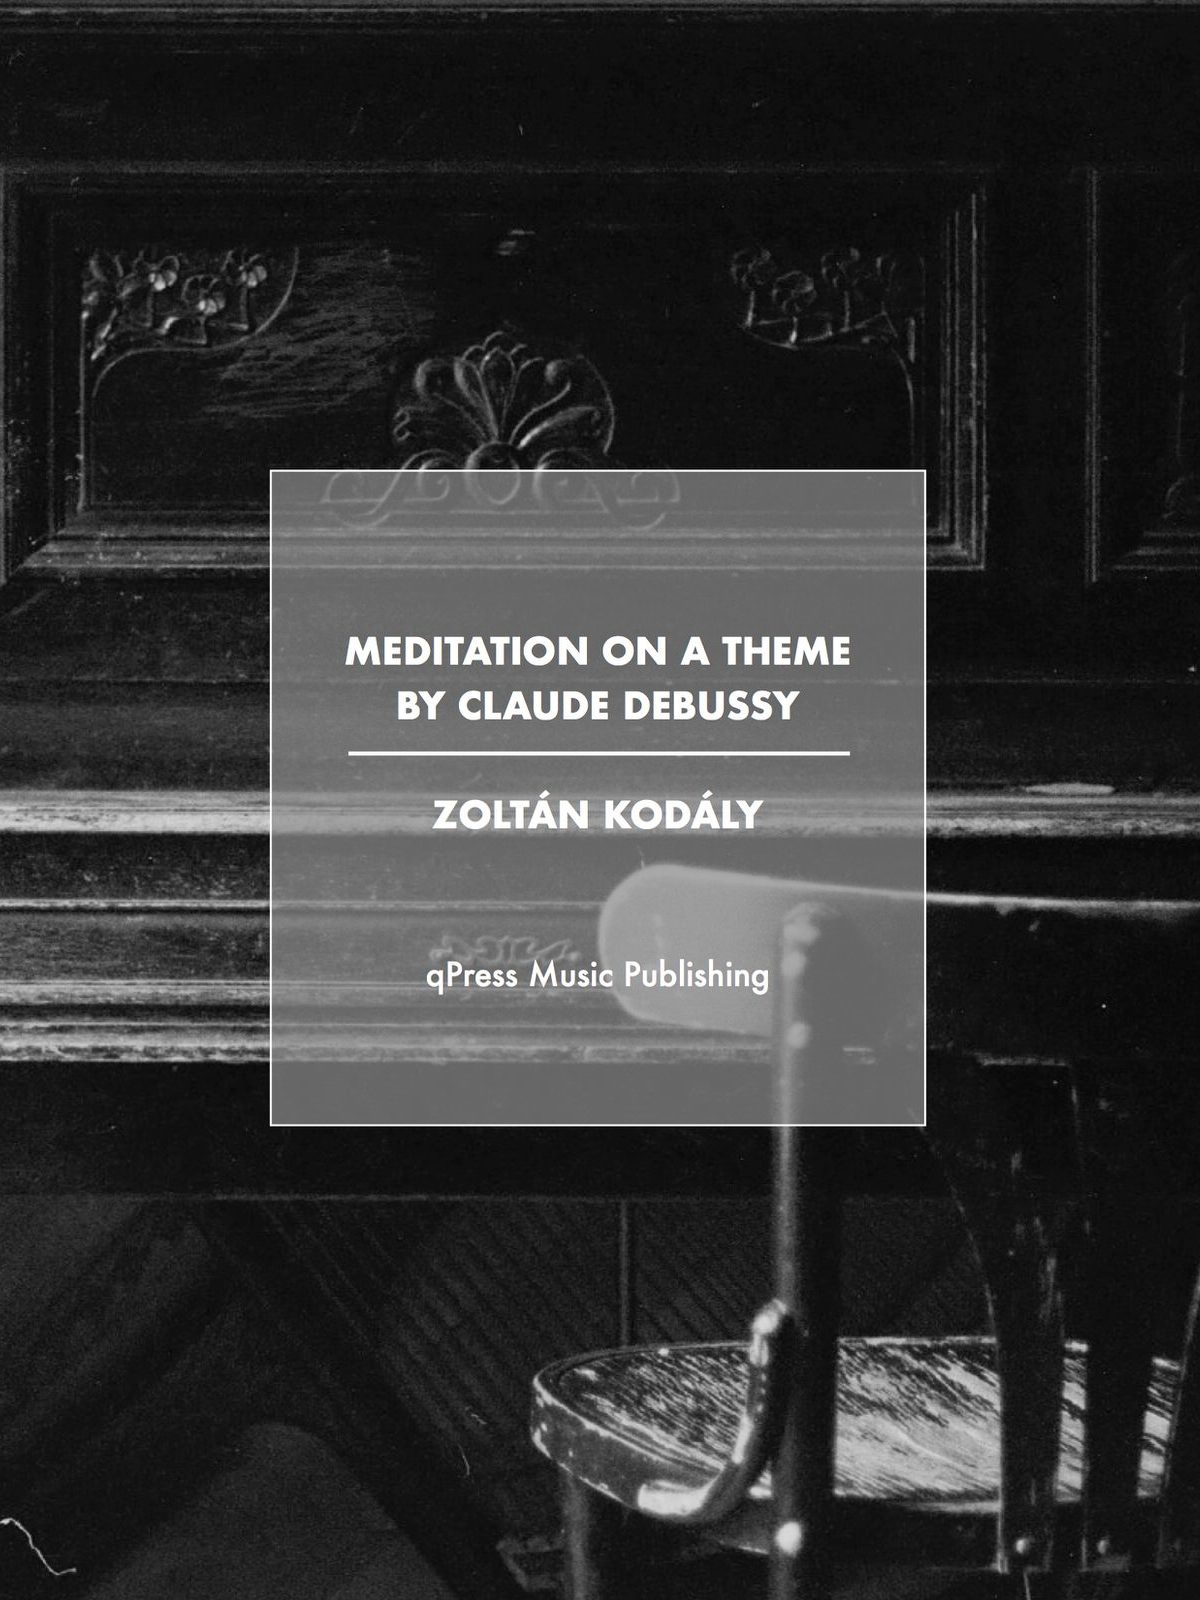 Kodály, Meditation on a Theme By Claude Debussy-p1